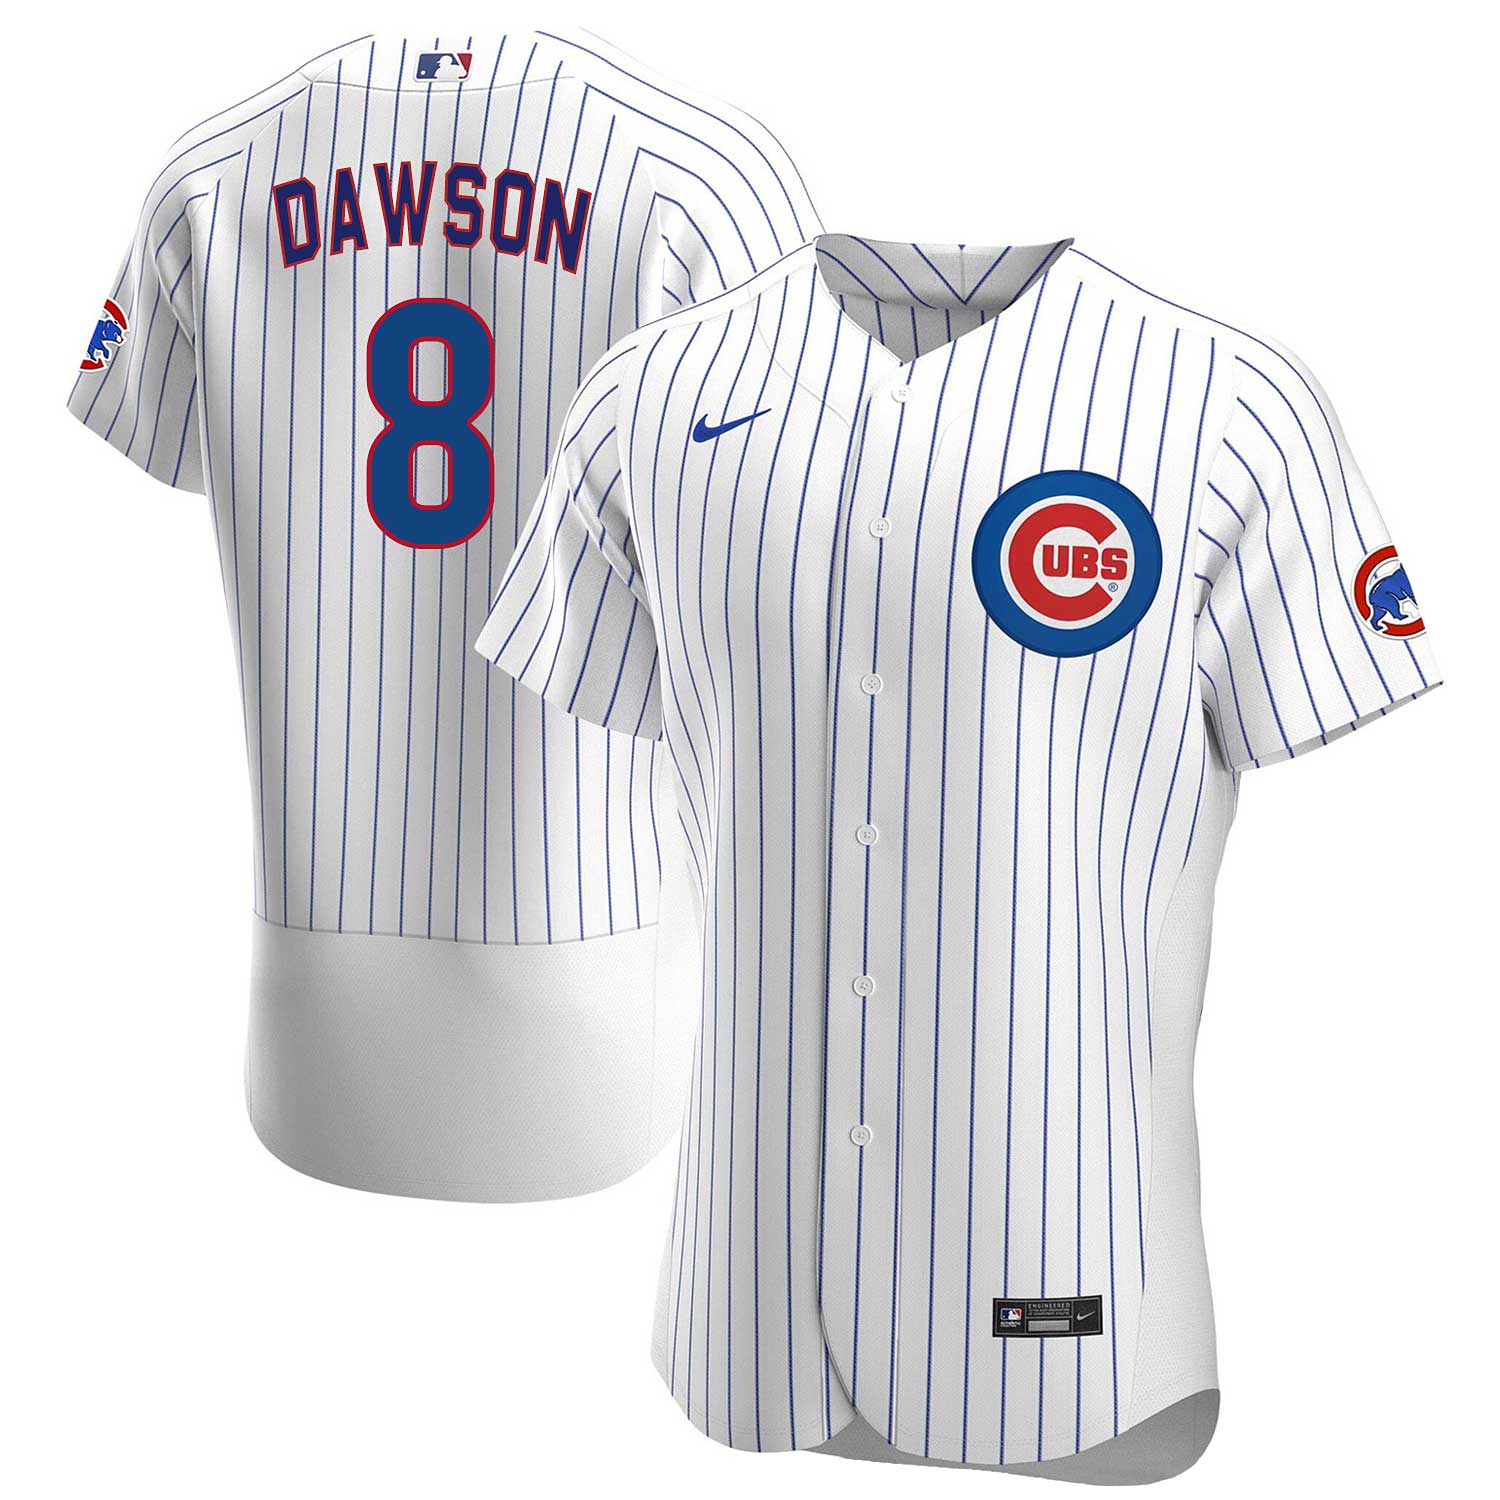 Chicago Cubs Andre Dawson Nike Home Authentic Jersey 52 = XX-Large